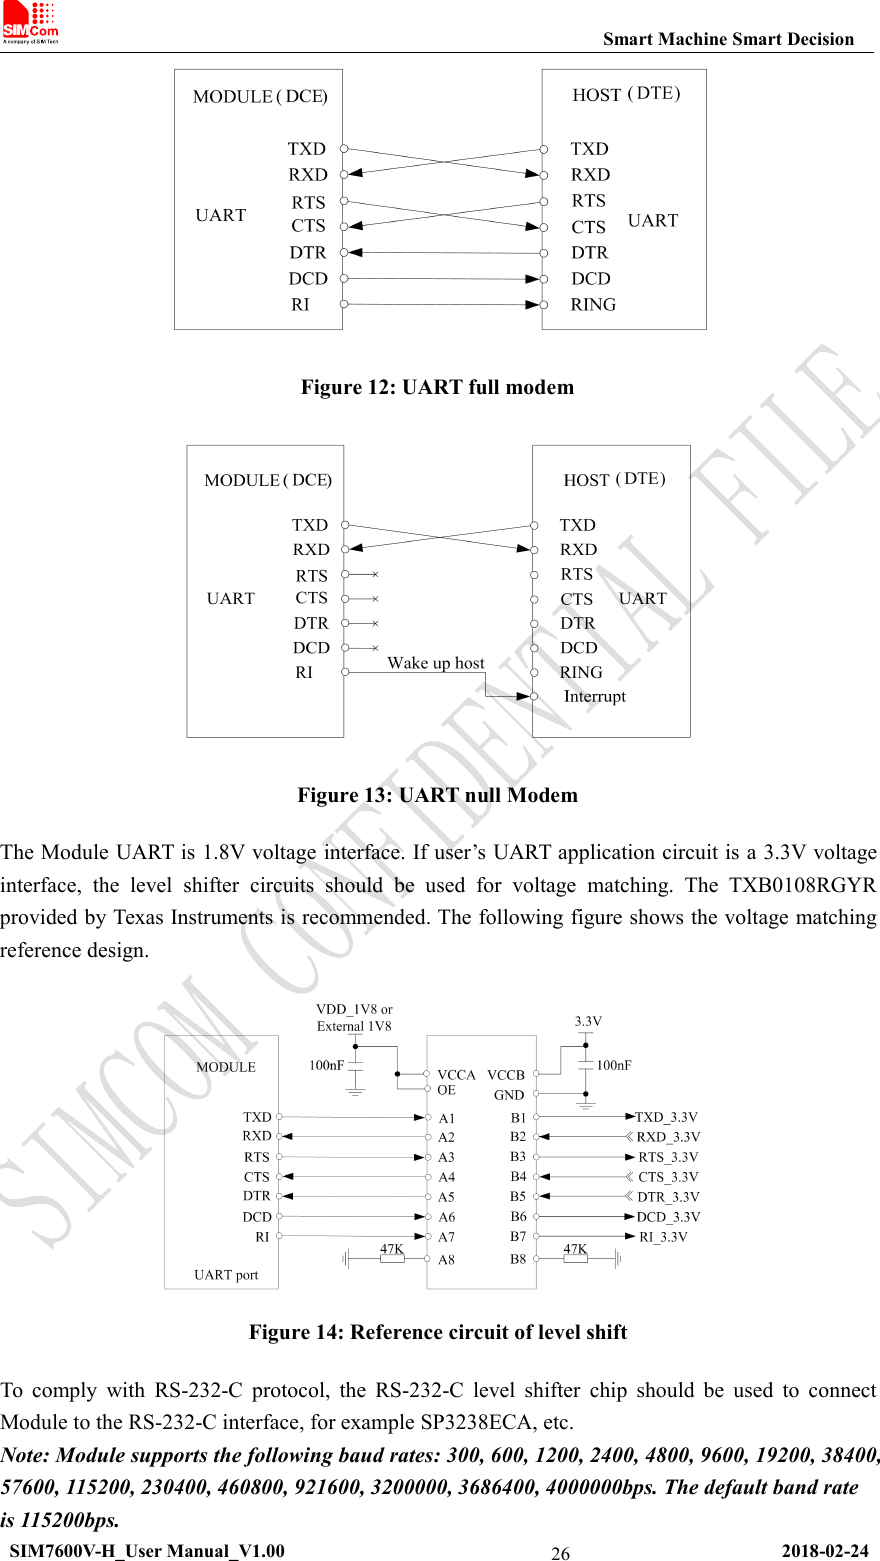 Smart Machine Smart DecisionSIM7600V-H_User Manual_V1.00 2018-02-2426Figure 12: UART full modemFigure 13: UART null ModemThe Module UART is 1.8V voltage interface. If user’s UART application circuit is a 3.3V voltageinterface, the level shifter circuits should be used for voltage matching. The TXB0108RGYRprovided by Texas Instruments is recommended. The following figure shows the voltage matchingreference design.Figure 14: Reference circuit of level shiftTo comply with RS-232-C protocol, the RS-232-C level shifter chip should be used to connectModule to the RS-232-C interface, for example SP3238ECA, etc.Note: Module supports the following baud rates: 300, 600, 1200, 2400, 4800, 9600, 19200, 38400,57600, 115200, 230400, 460800, 921600, 3200000, 3686400, 4000000bps. The default band rateis 115200bps.